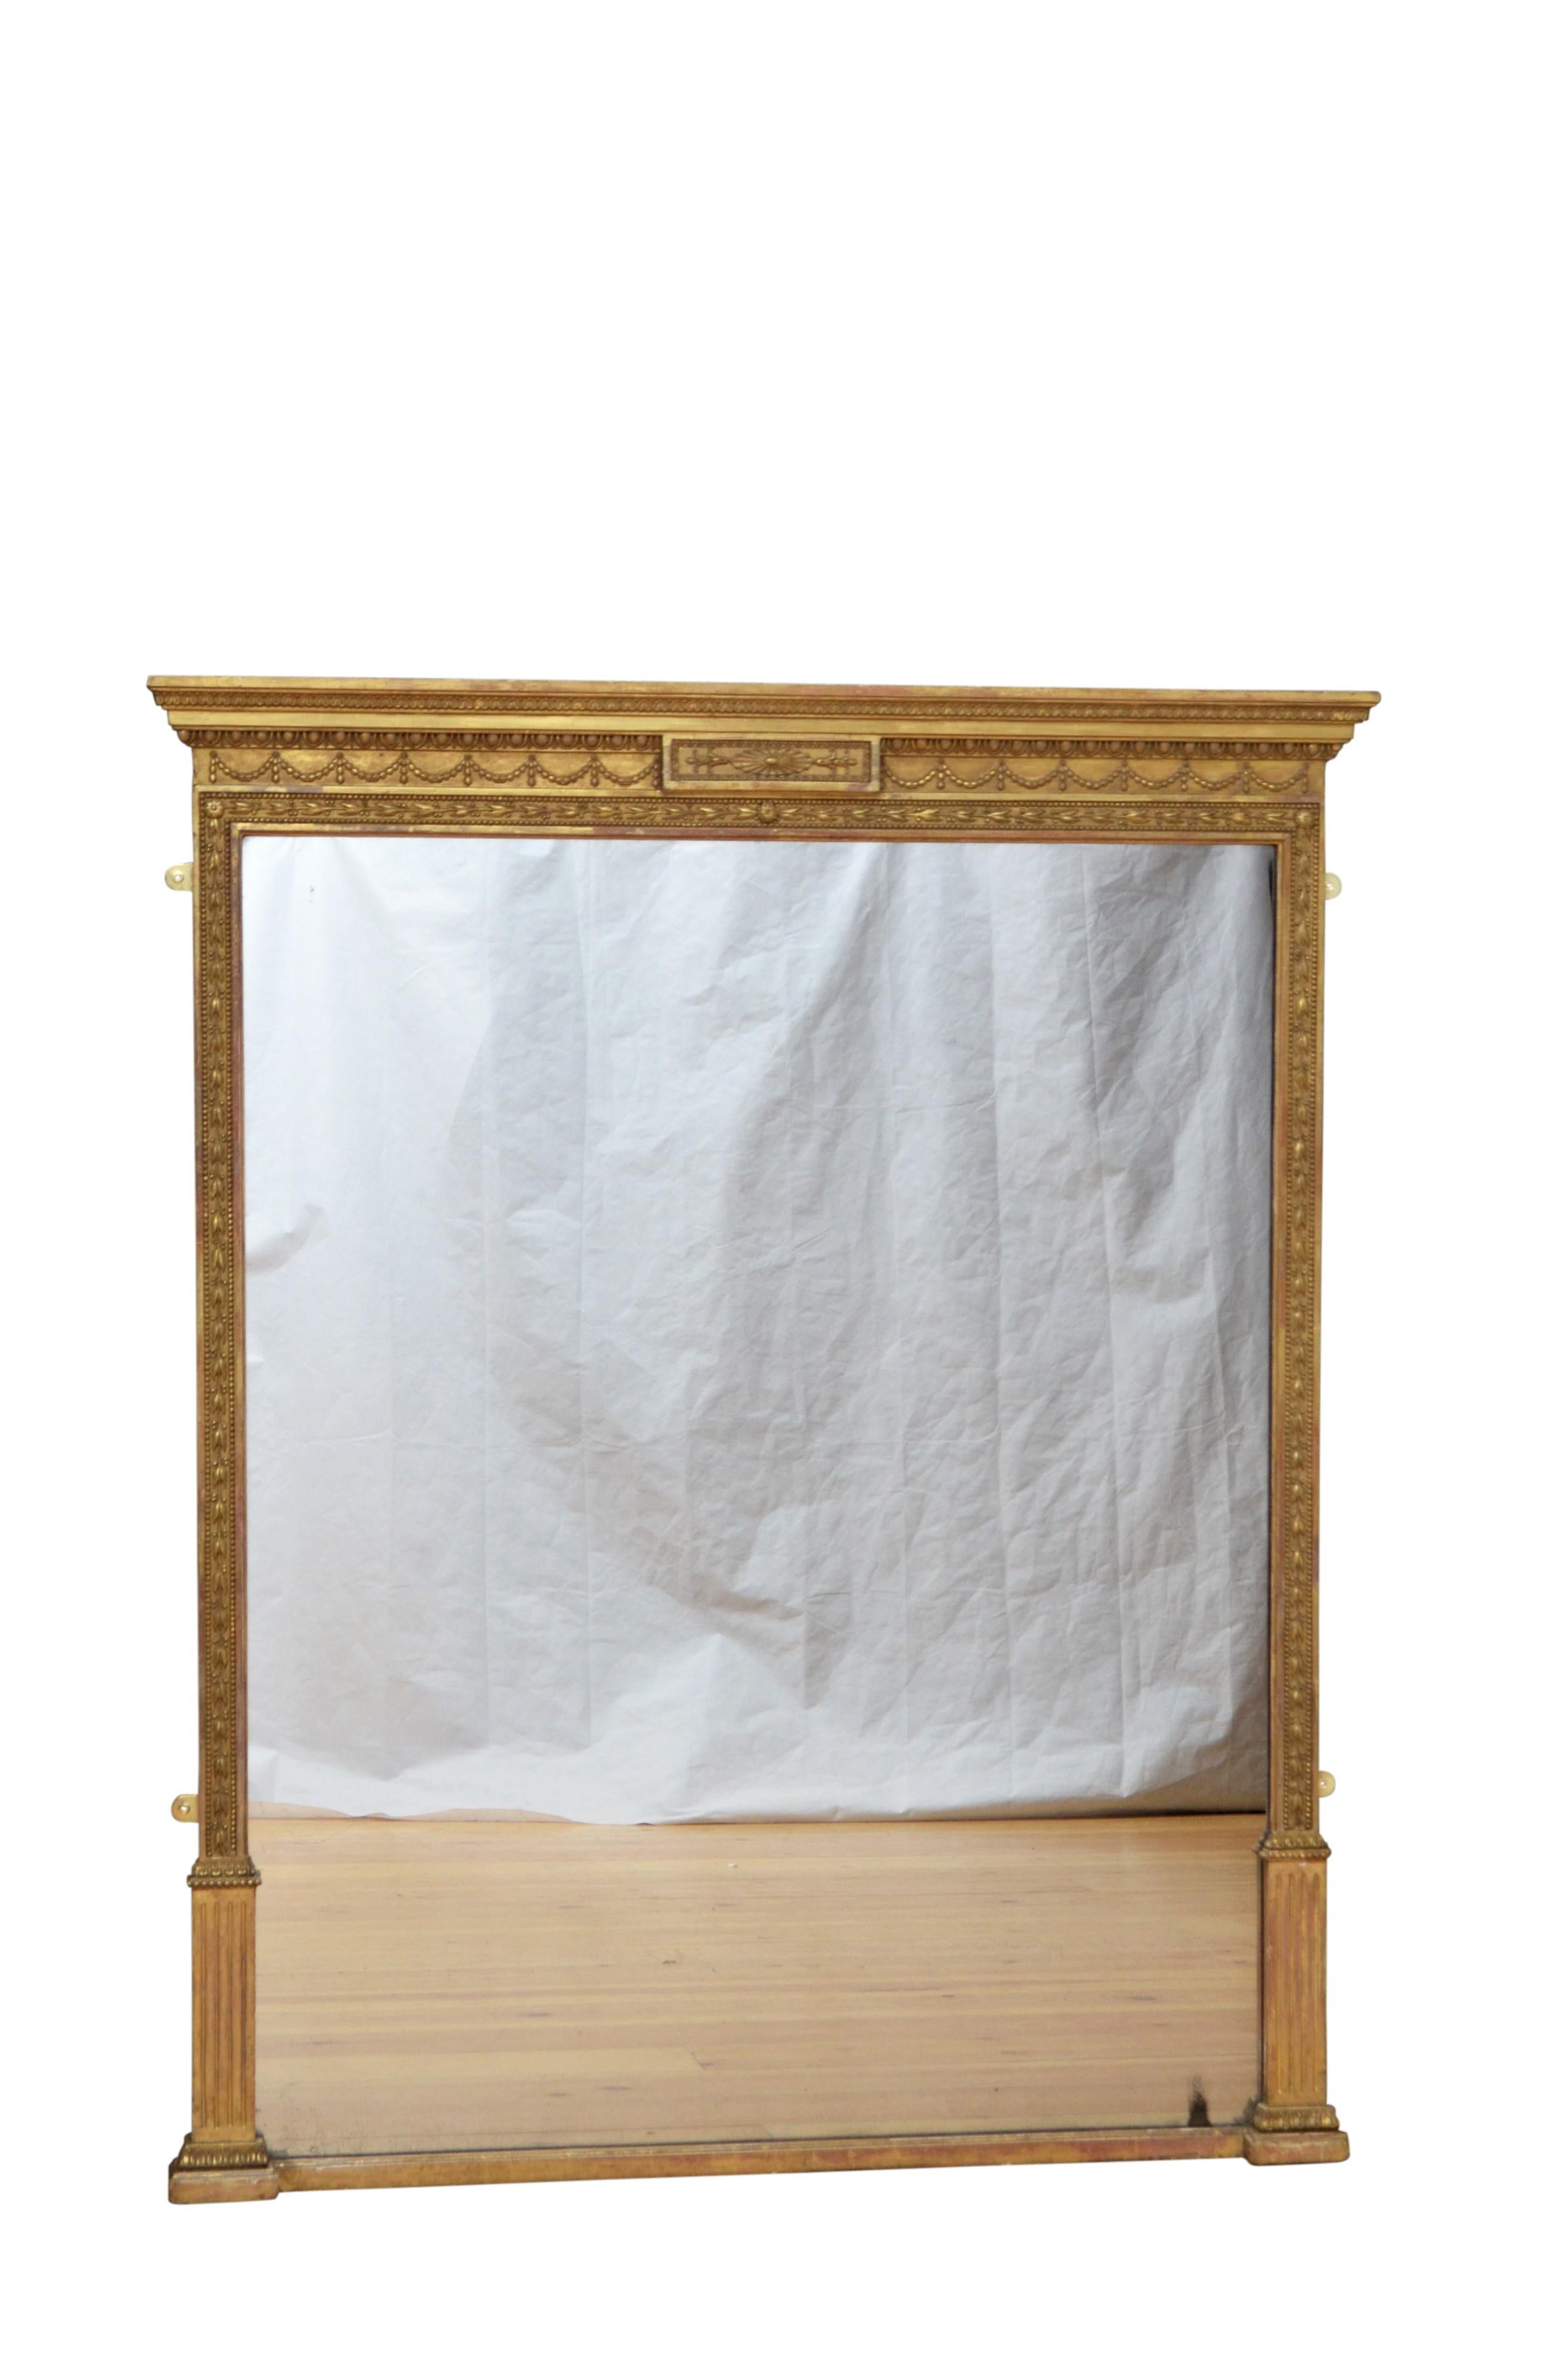 Fine Victorian gilded overmantel mirror, having original glass with some imperfections in floral carved frame with moulded cornice above egg and dart decoration and swags to the frieze. This antique wall mirror retains its original gilt, glass and